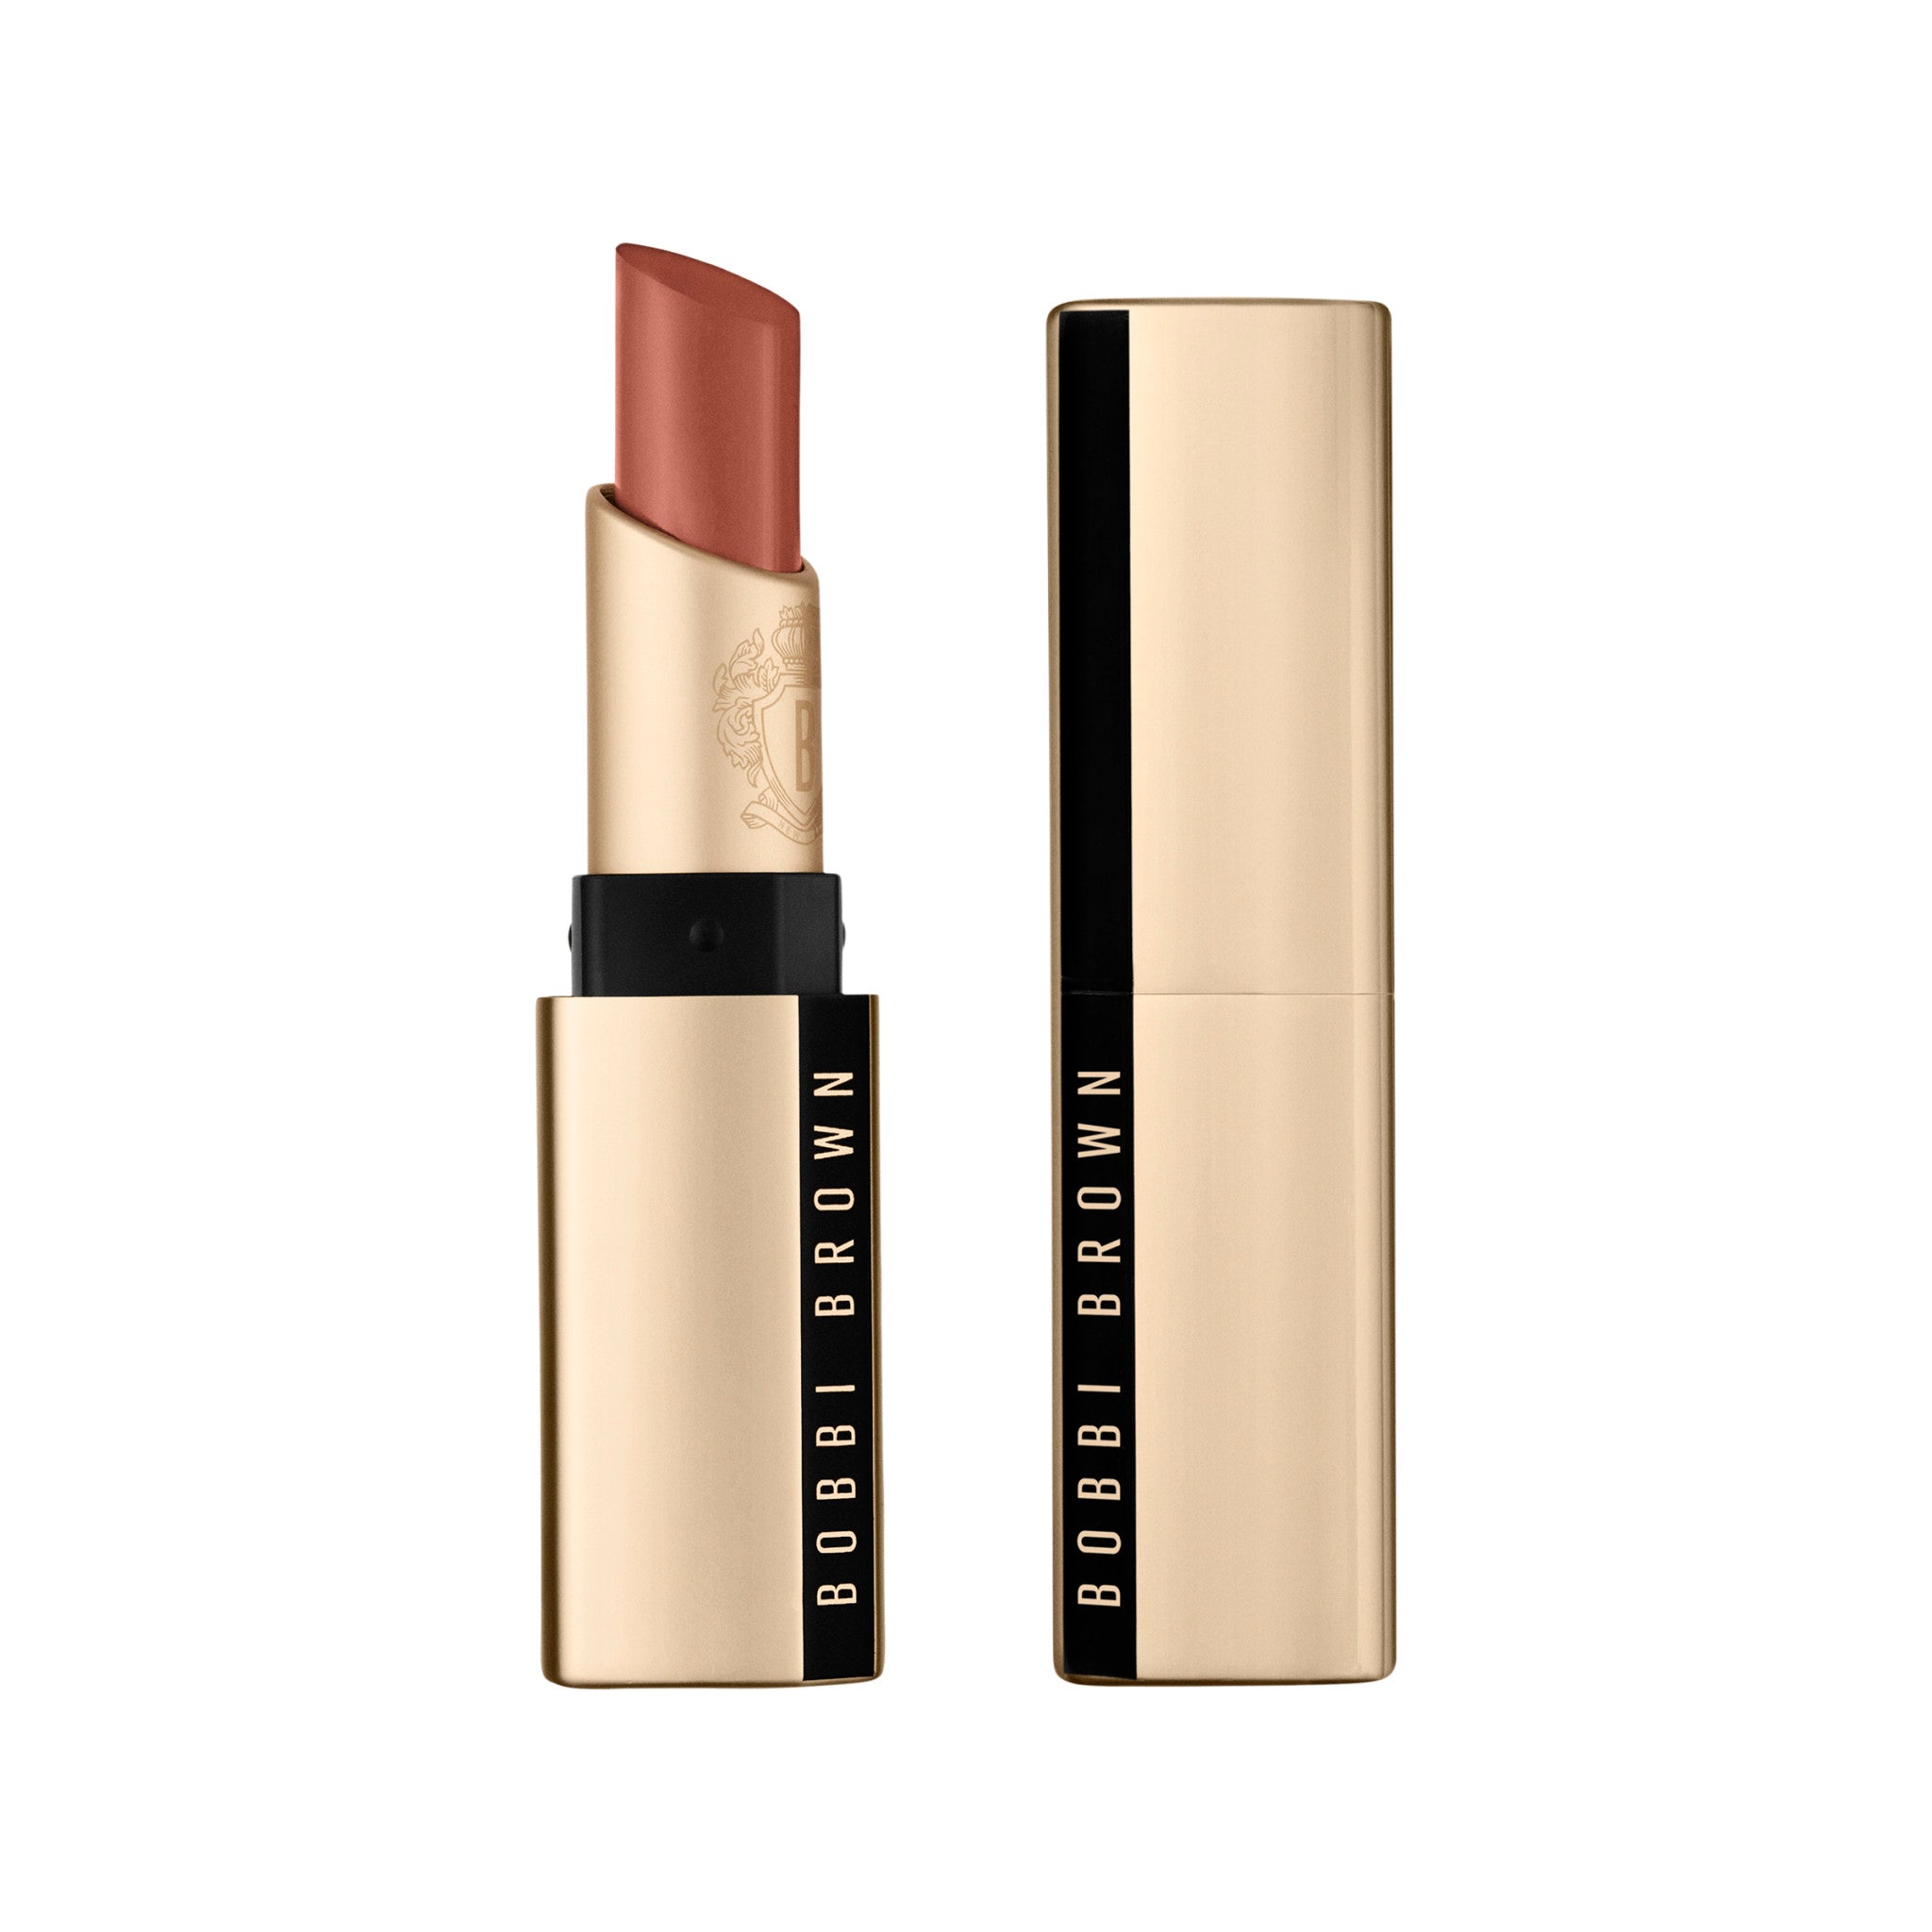 Bobbi Brown Luxe Matte Lipstick Color/Shade variant: Afternoon Tea main image.